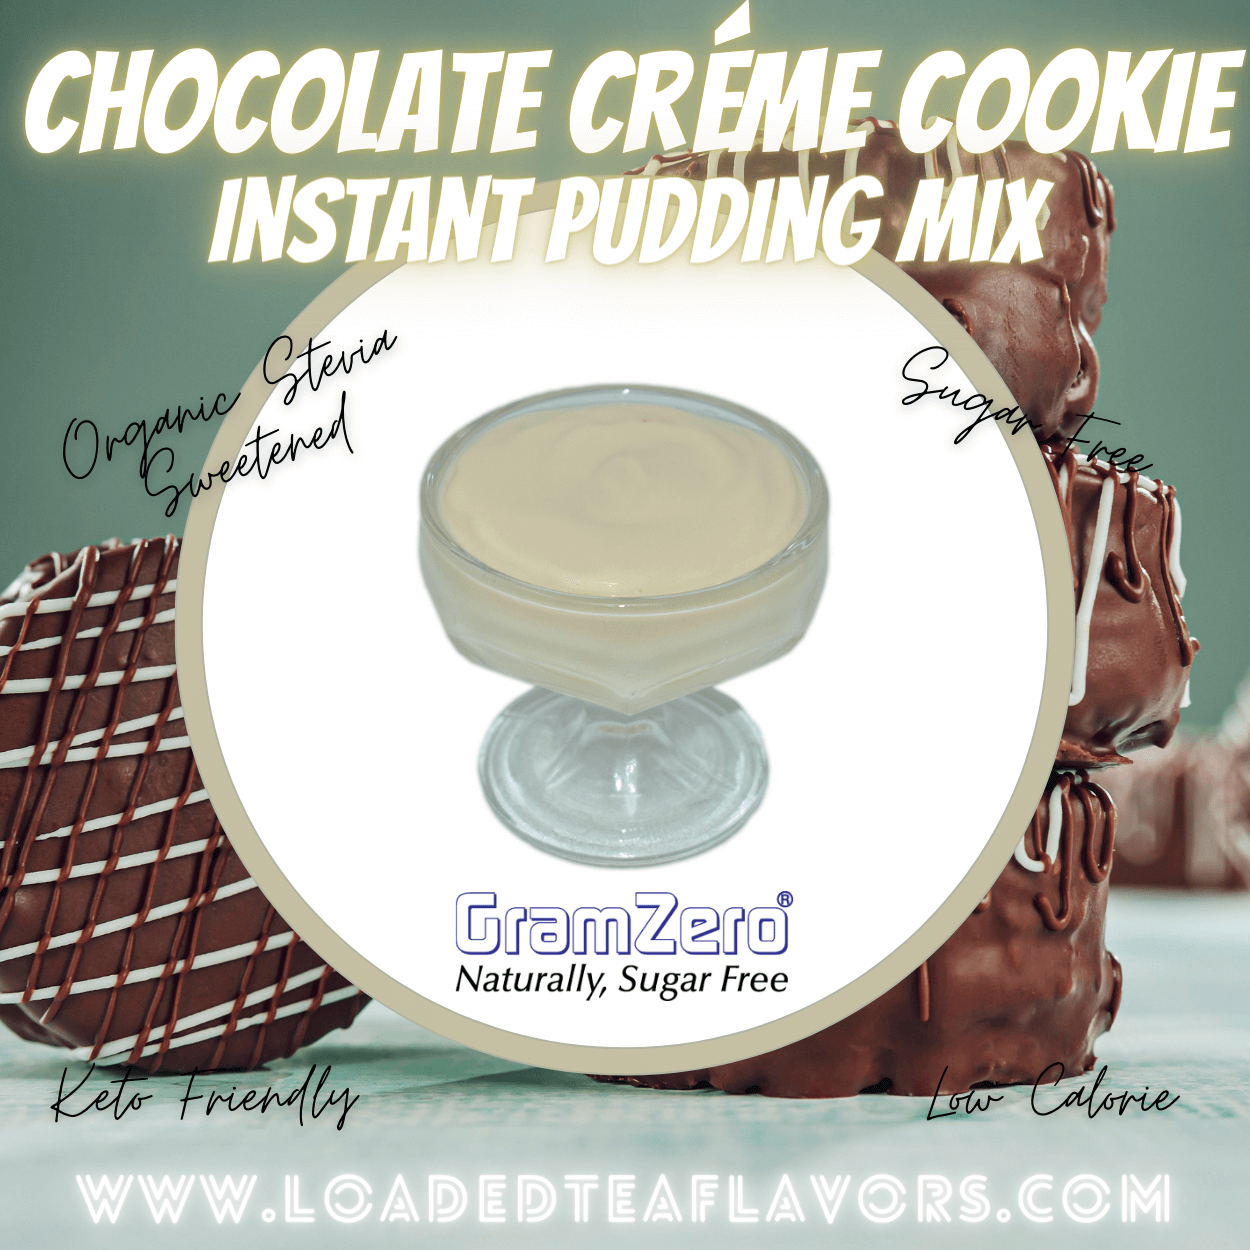 CHOCOLATE CRÉME COOKIE Sugar Free Pudding Mix 🍪 Protein Shake Flavoring